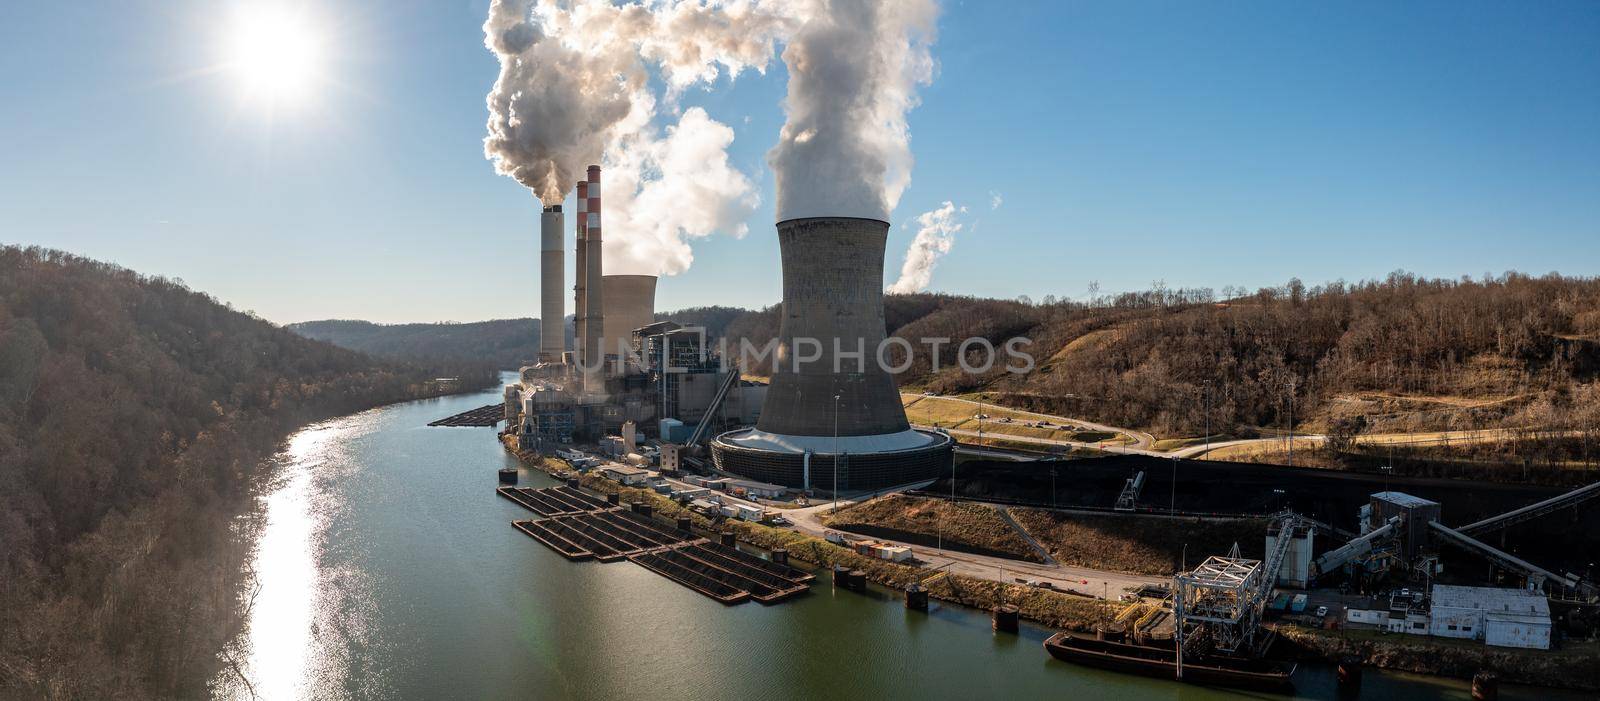 Fort Martin power station on the banks of the Monongahela river by steheap